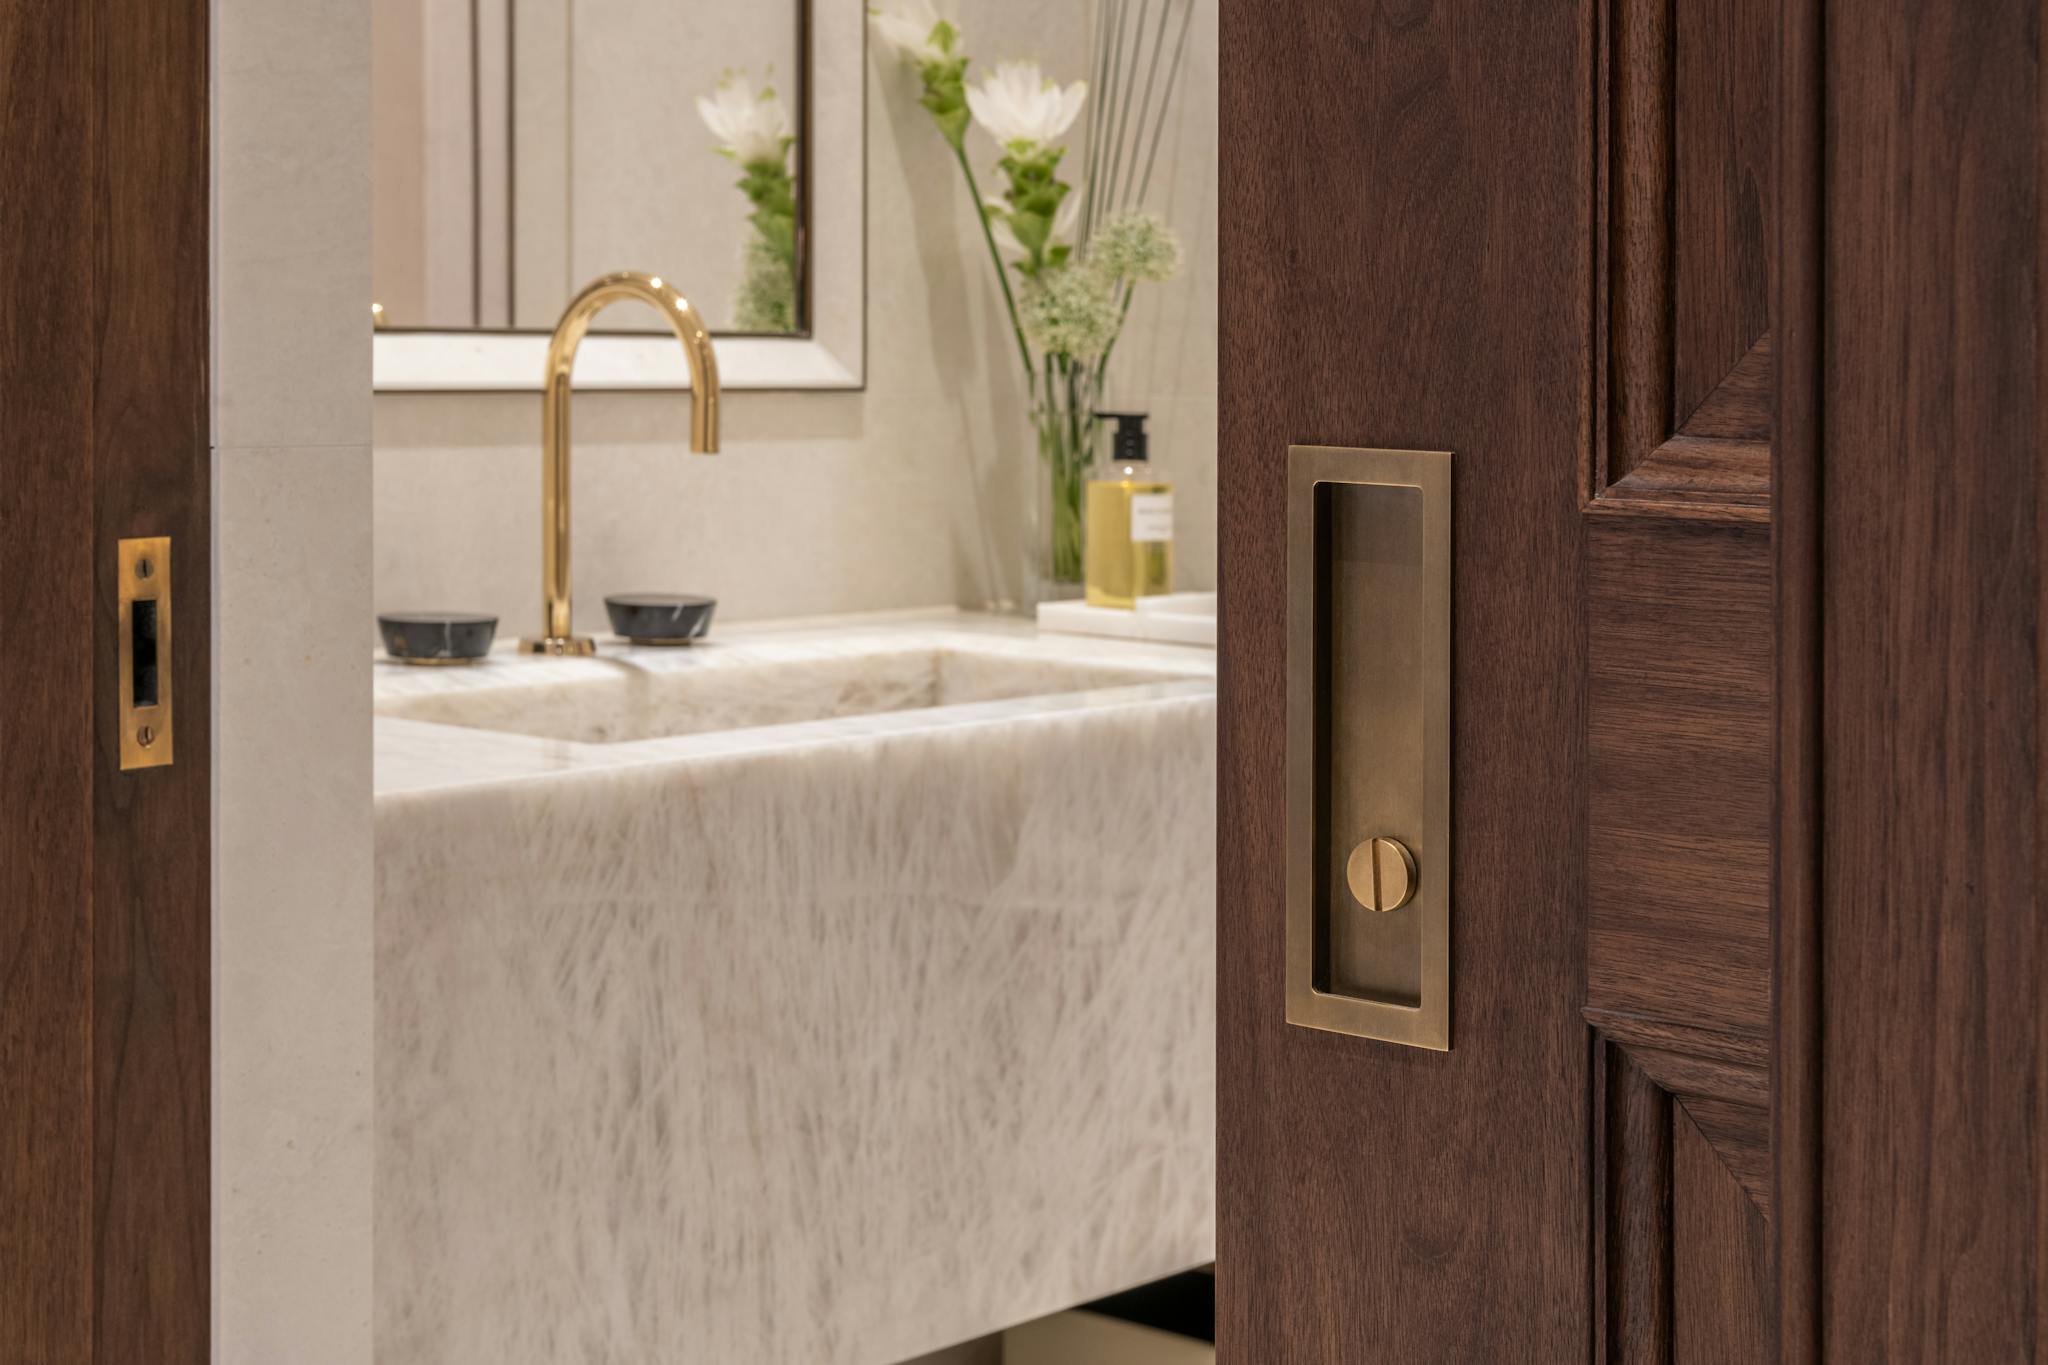 Looking into a luxury marbled bathroom with gold tap from partially closed dark wood sliding pocket door.